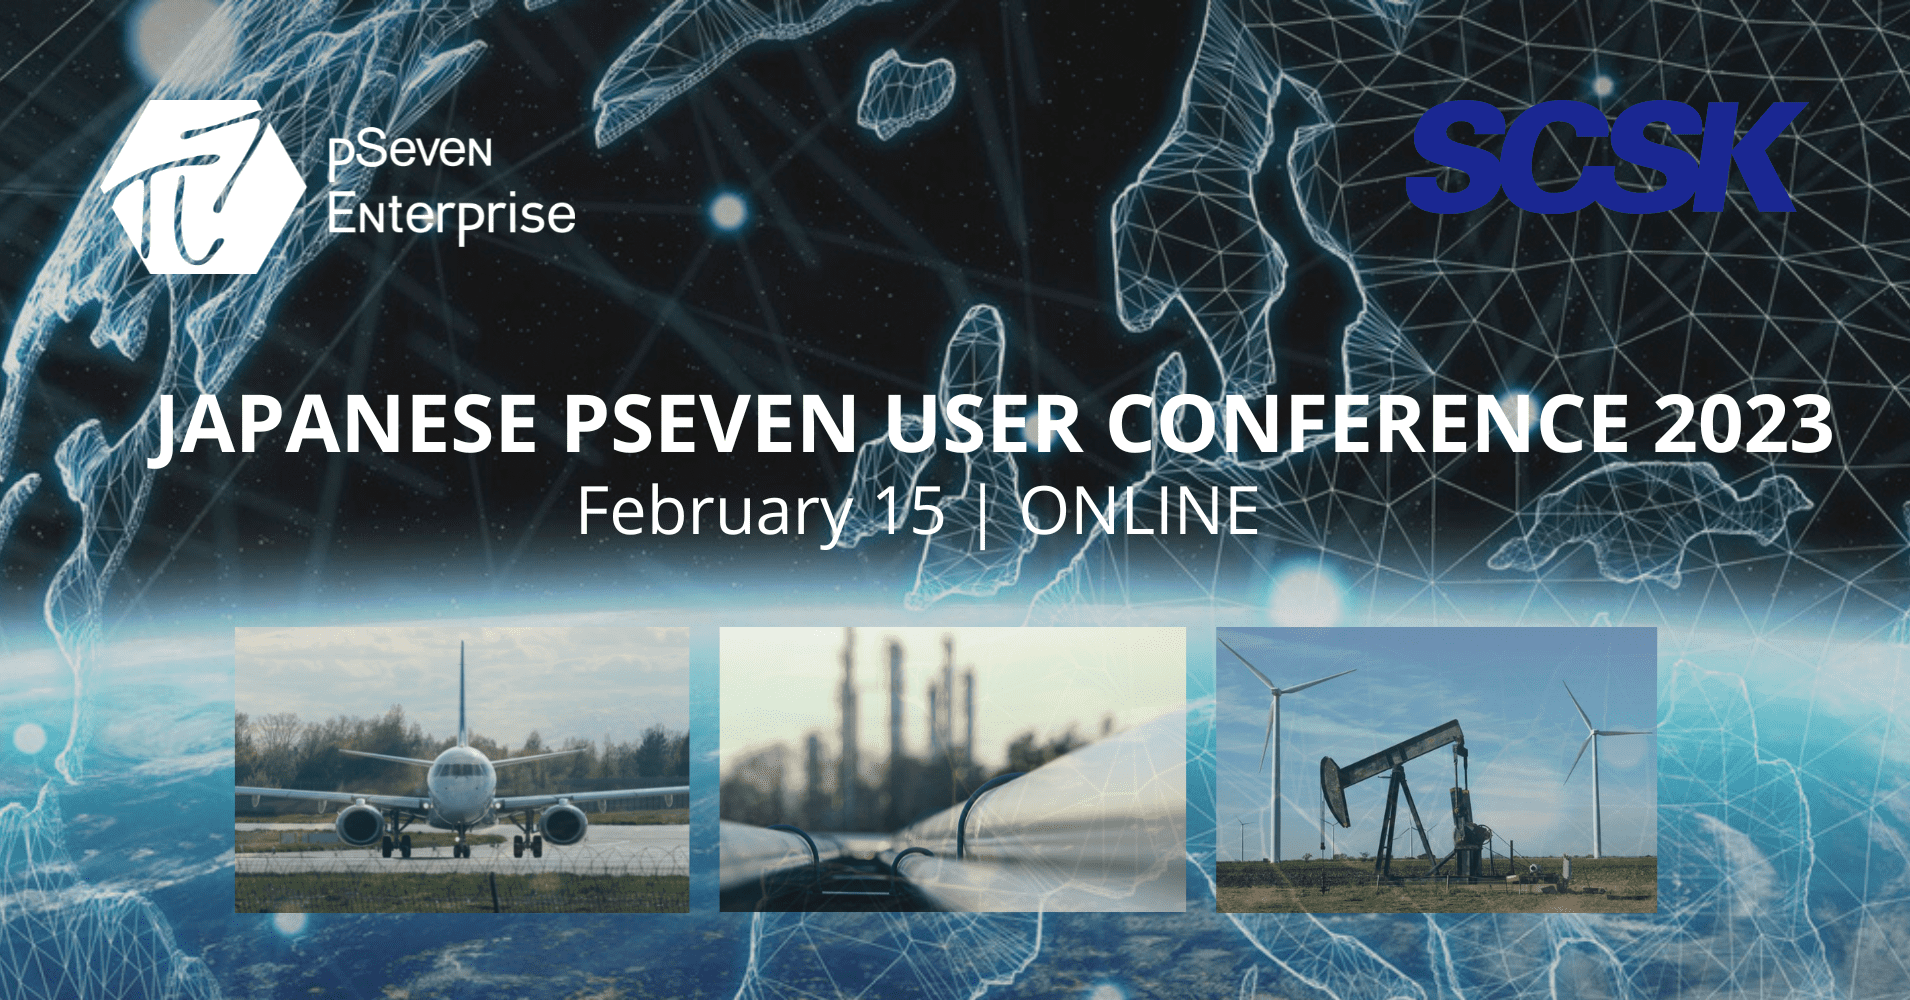 Japanese pSeven User Conference